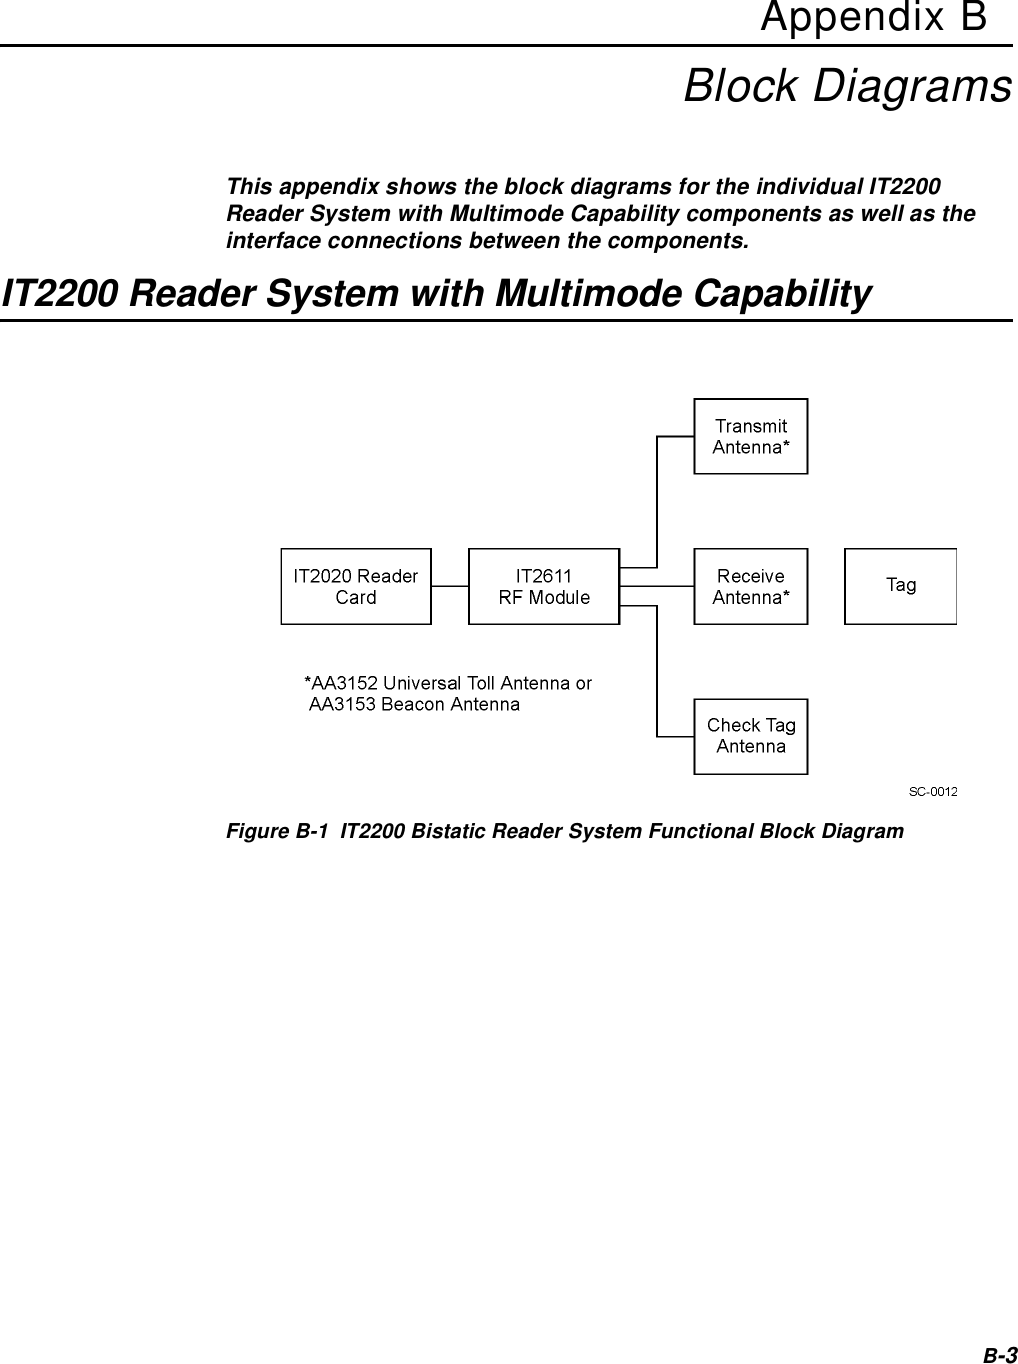 B-3Appendix BBlock DiagramsThis appendix shows the block diagrams for the individual IT2200 Reader System with Multimode Capability components as well as the interface connections between the components.IT2200 Reader System with Multimode CapabilityFigure B-1  IT2200 Bistatic Reader System Functional Block Diagram